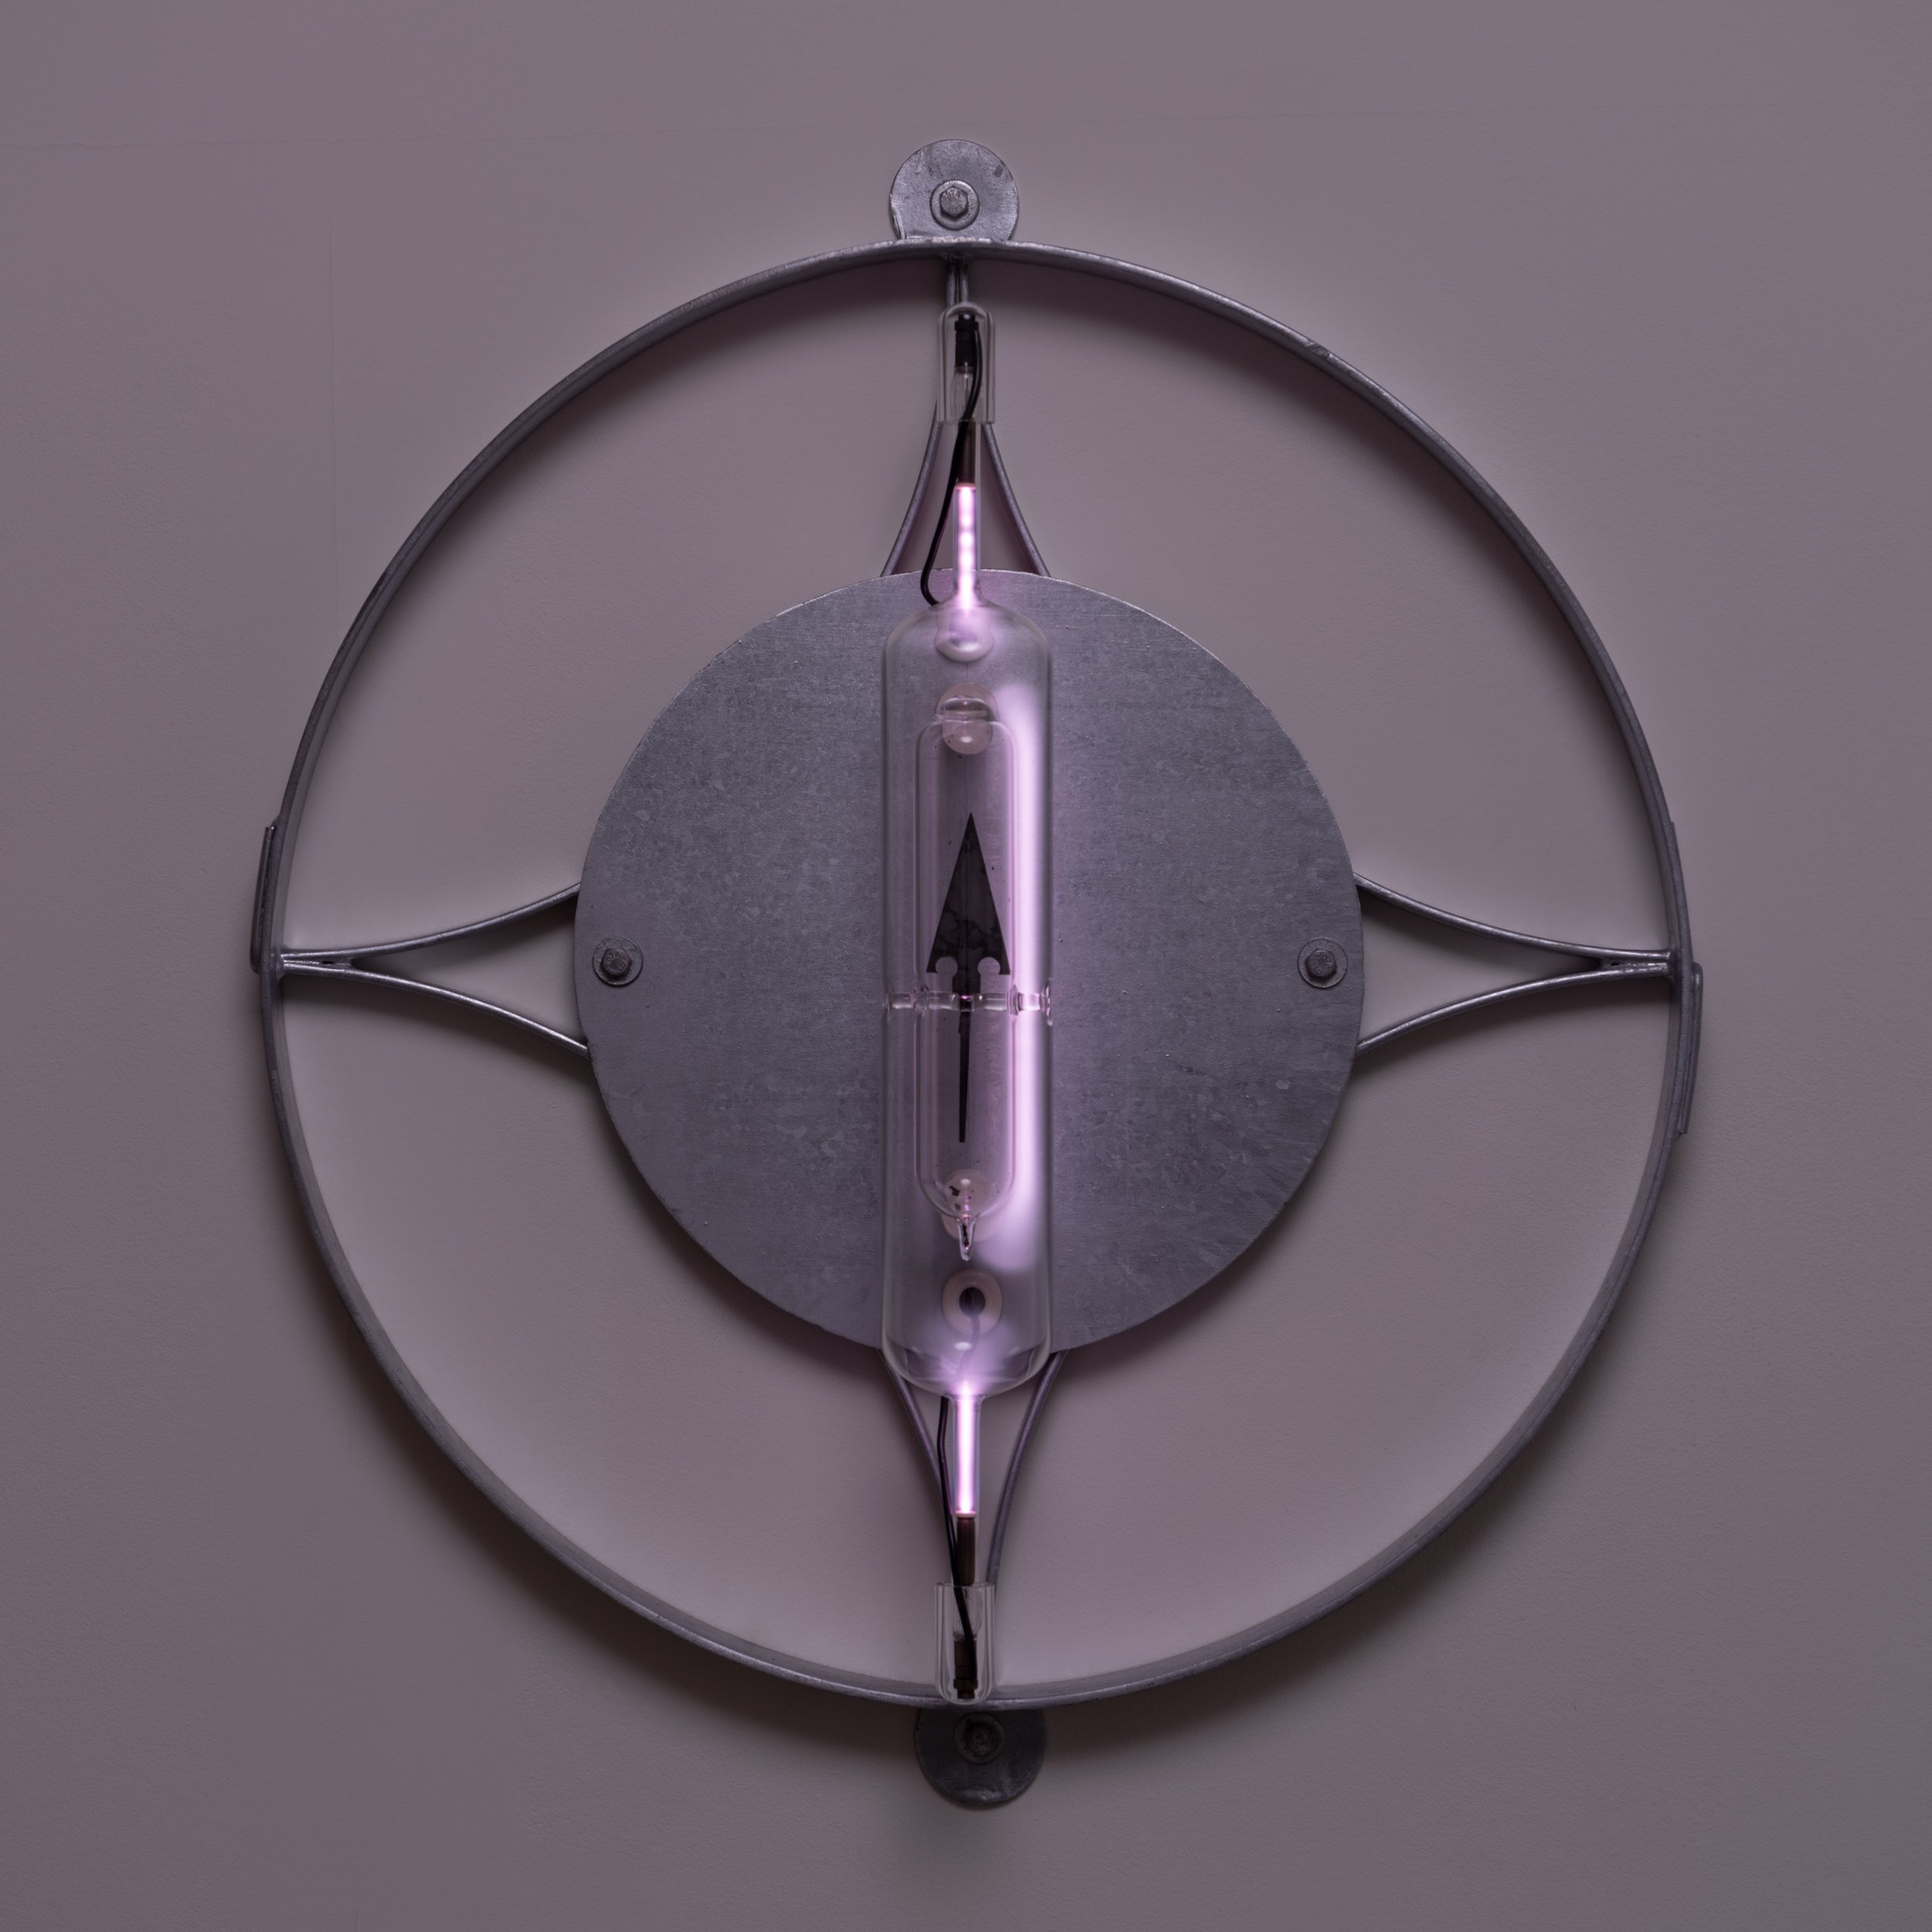   By Which (Fall) , 2023 Galvanized steel, steel, glass, argon, and electrical components 24 x 24 x 6 inches 